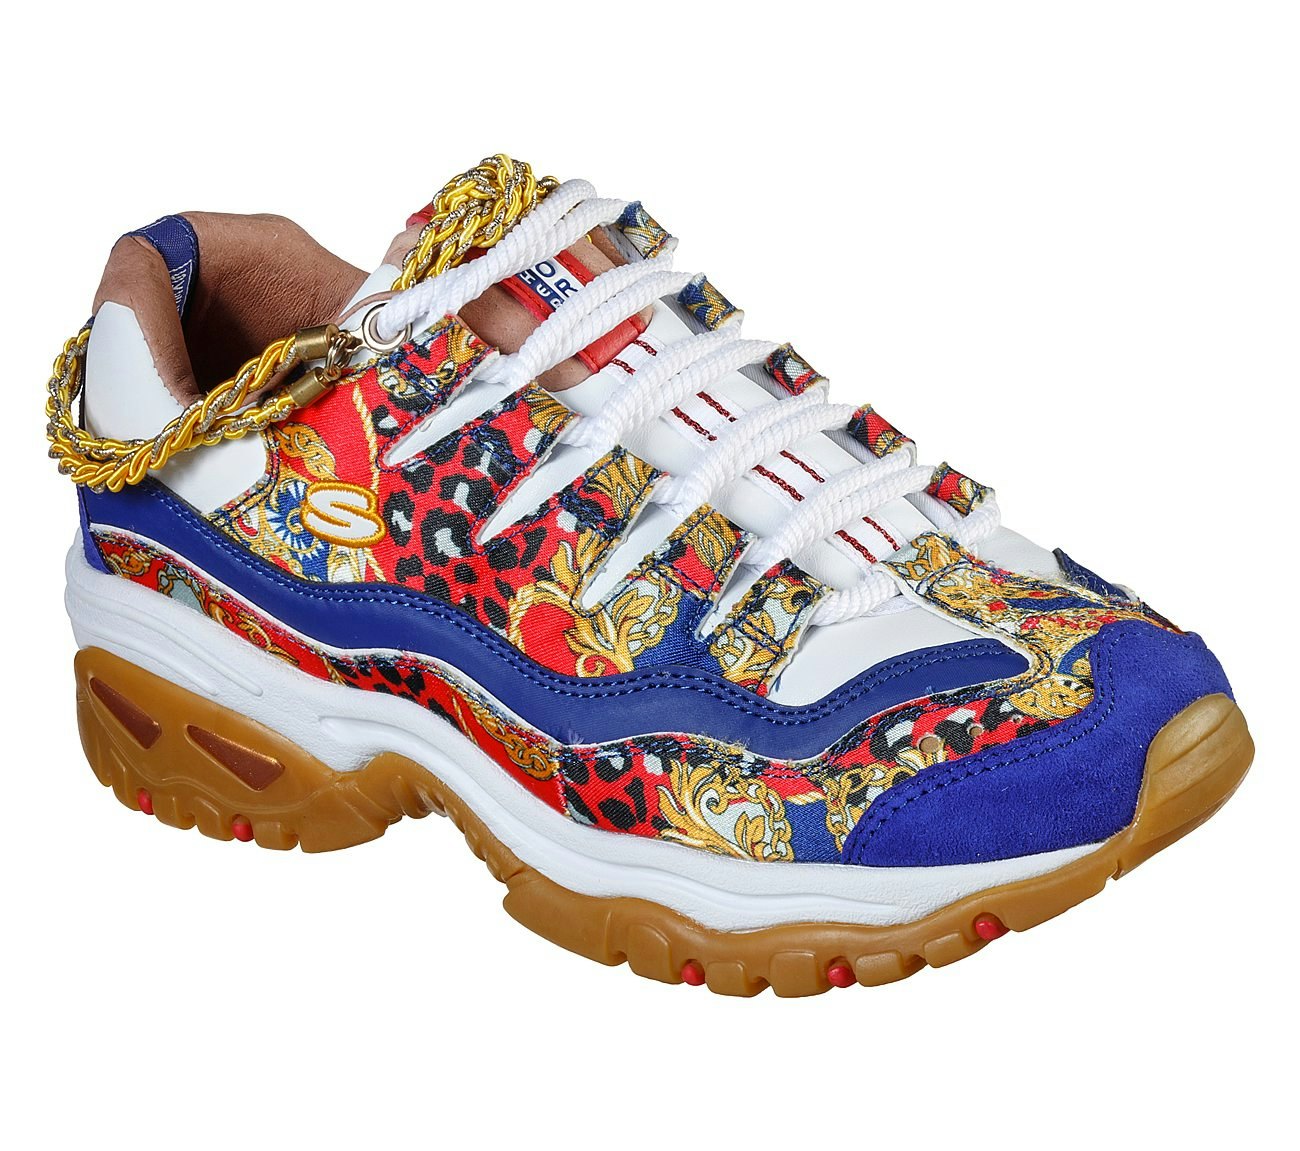 skechers heritage limited edition